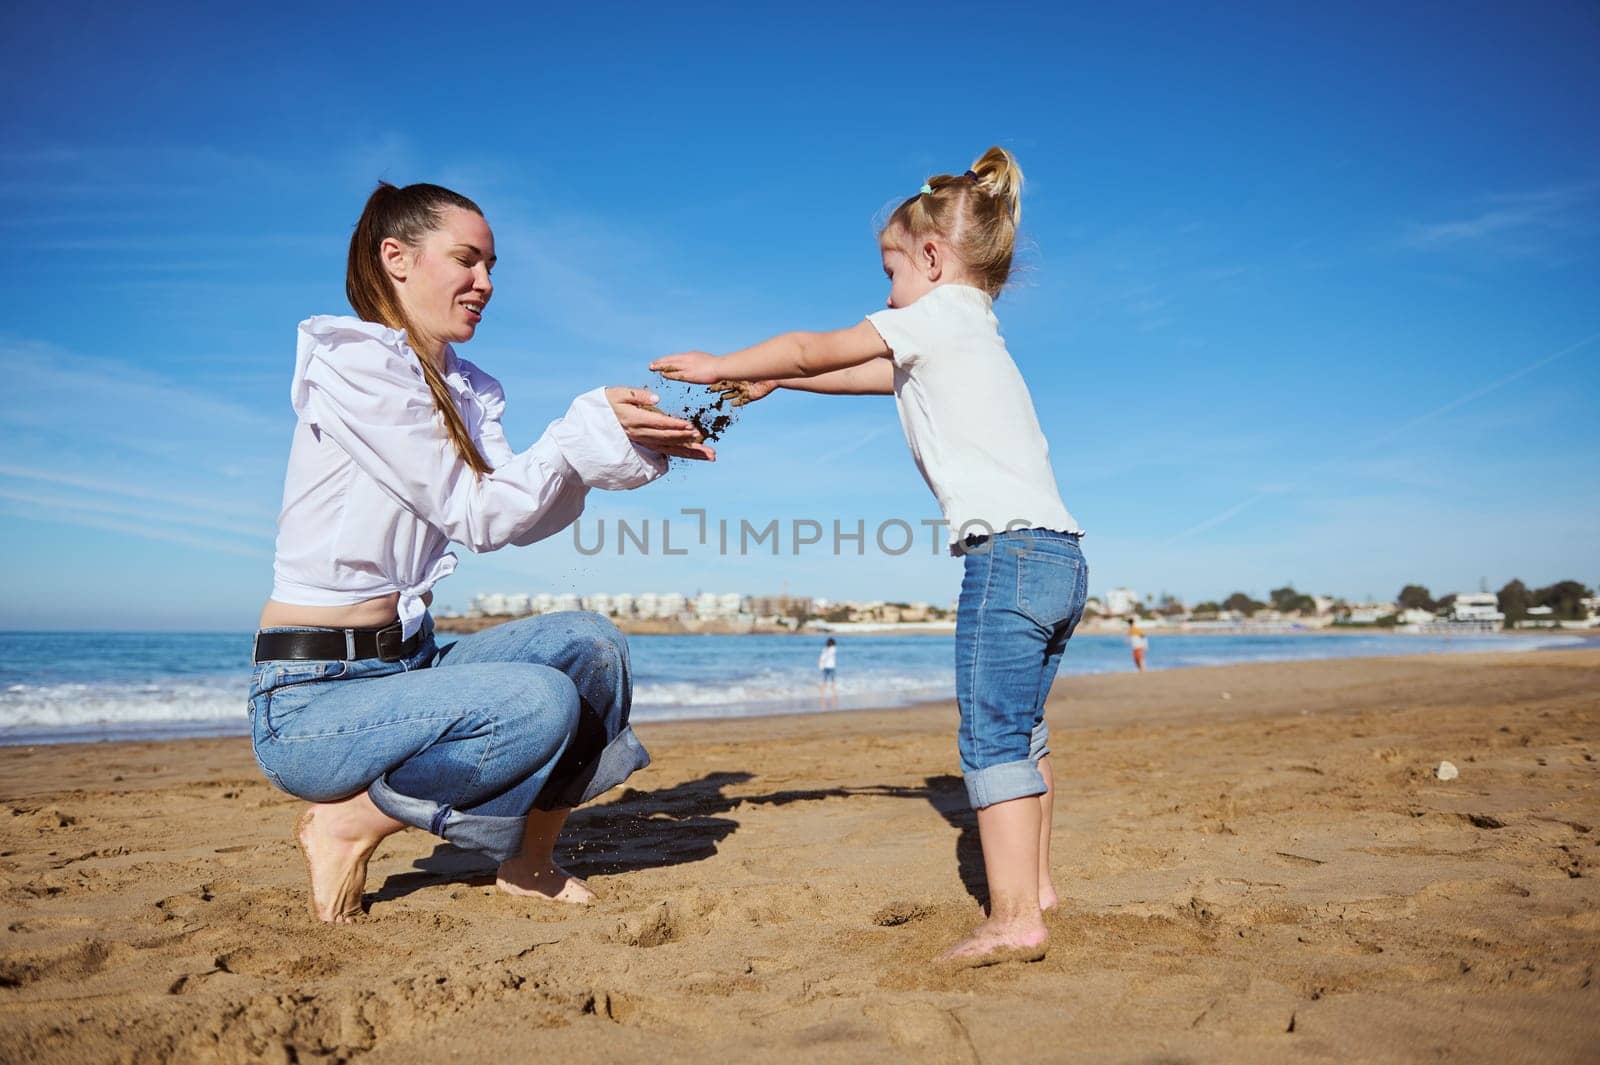 Mother and daughter playing on the beach together. Happy family relationships concept